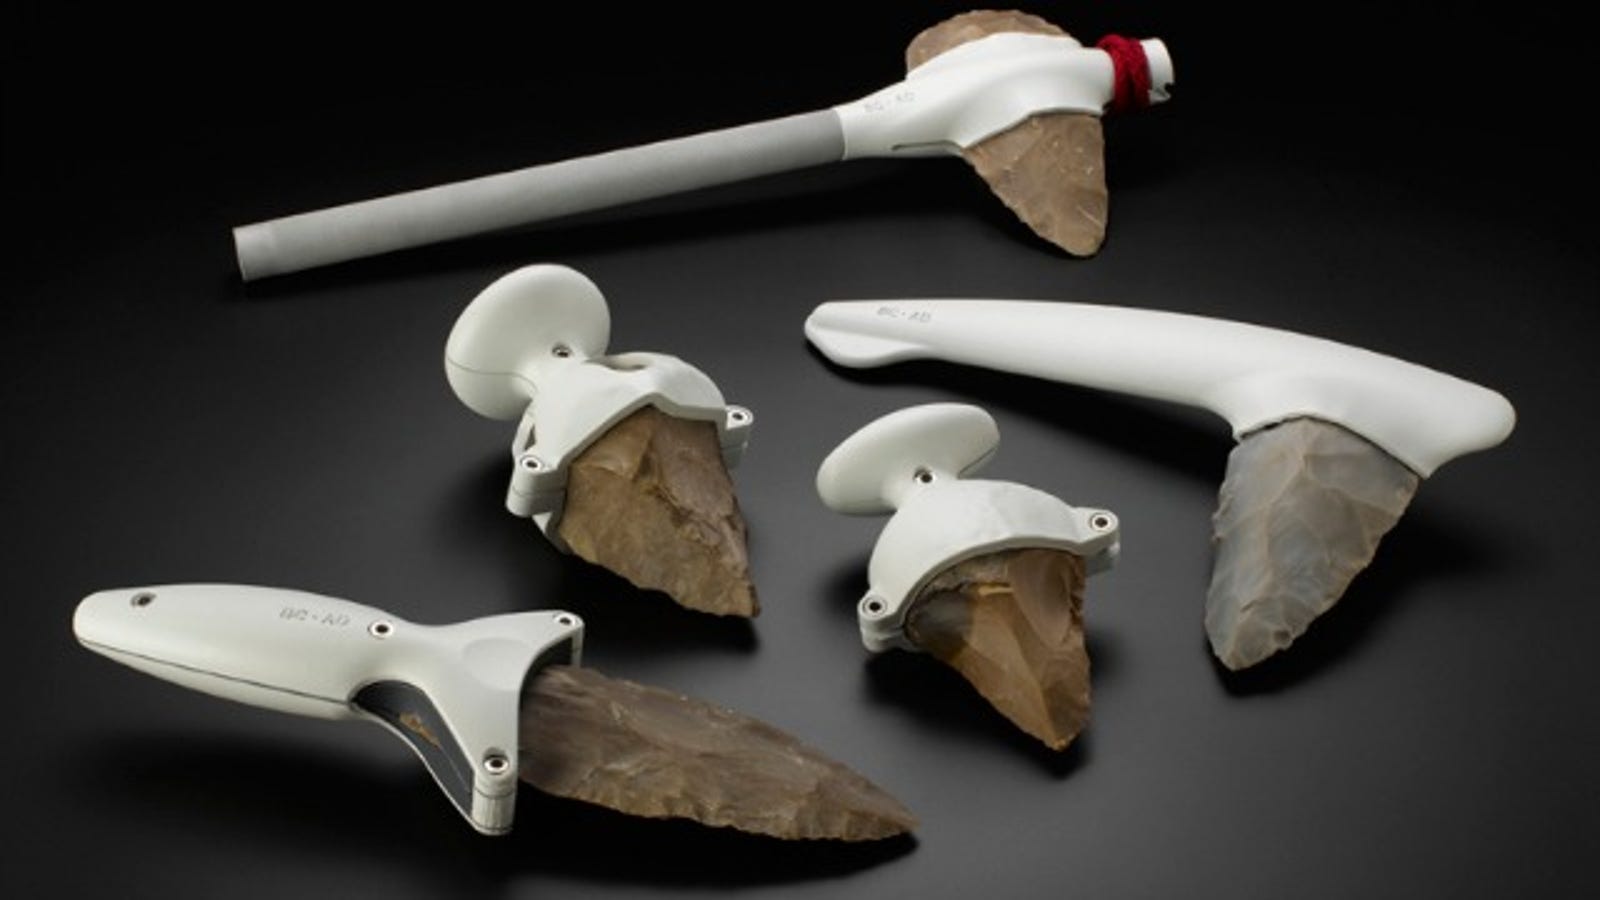 Unique Assemblage of Stone Tools Unearthed in Texas - Archaeology Magazine